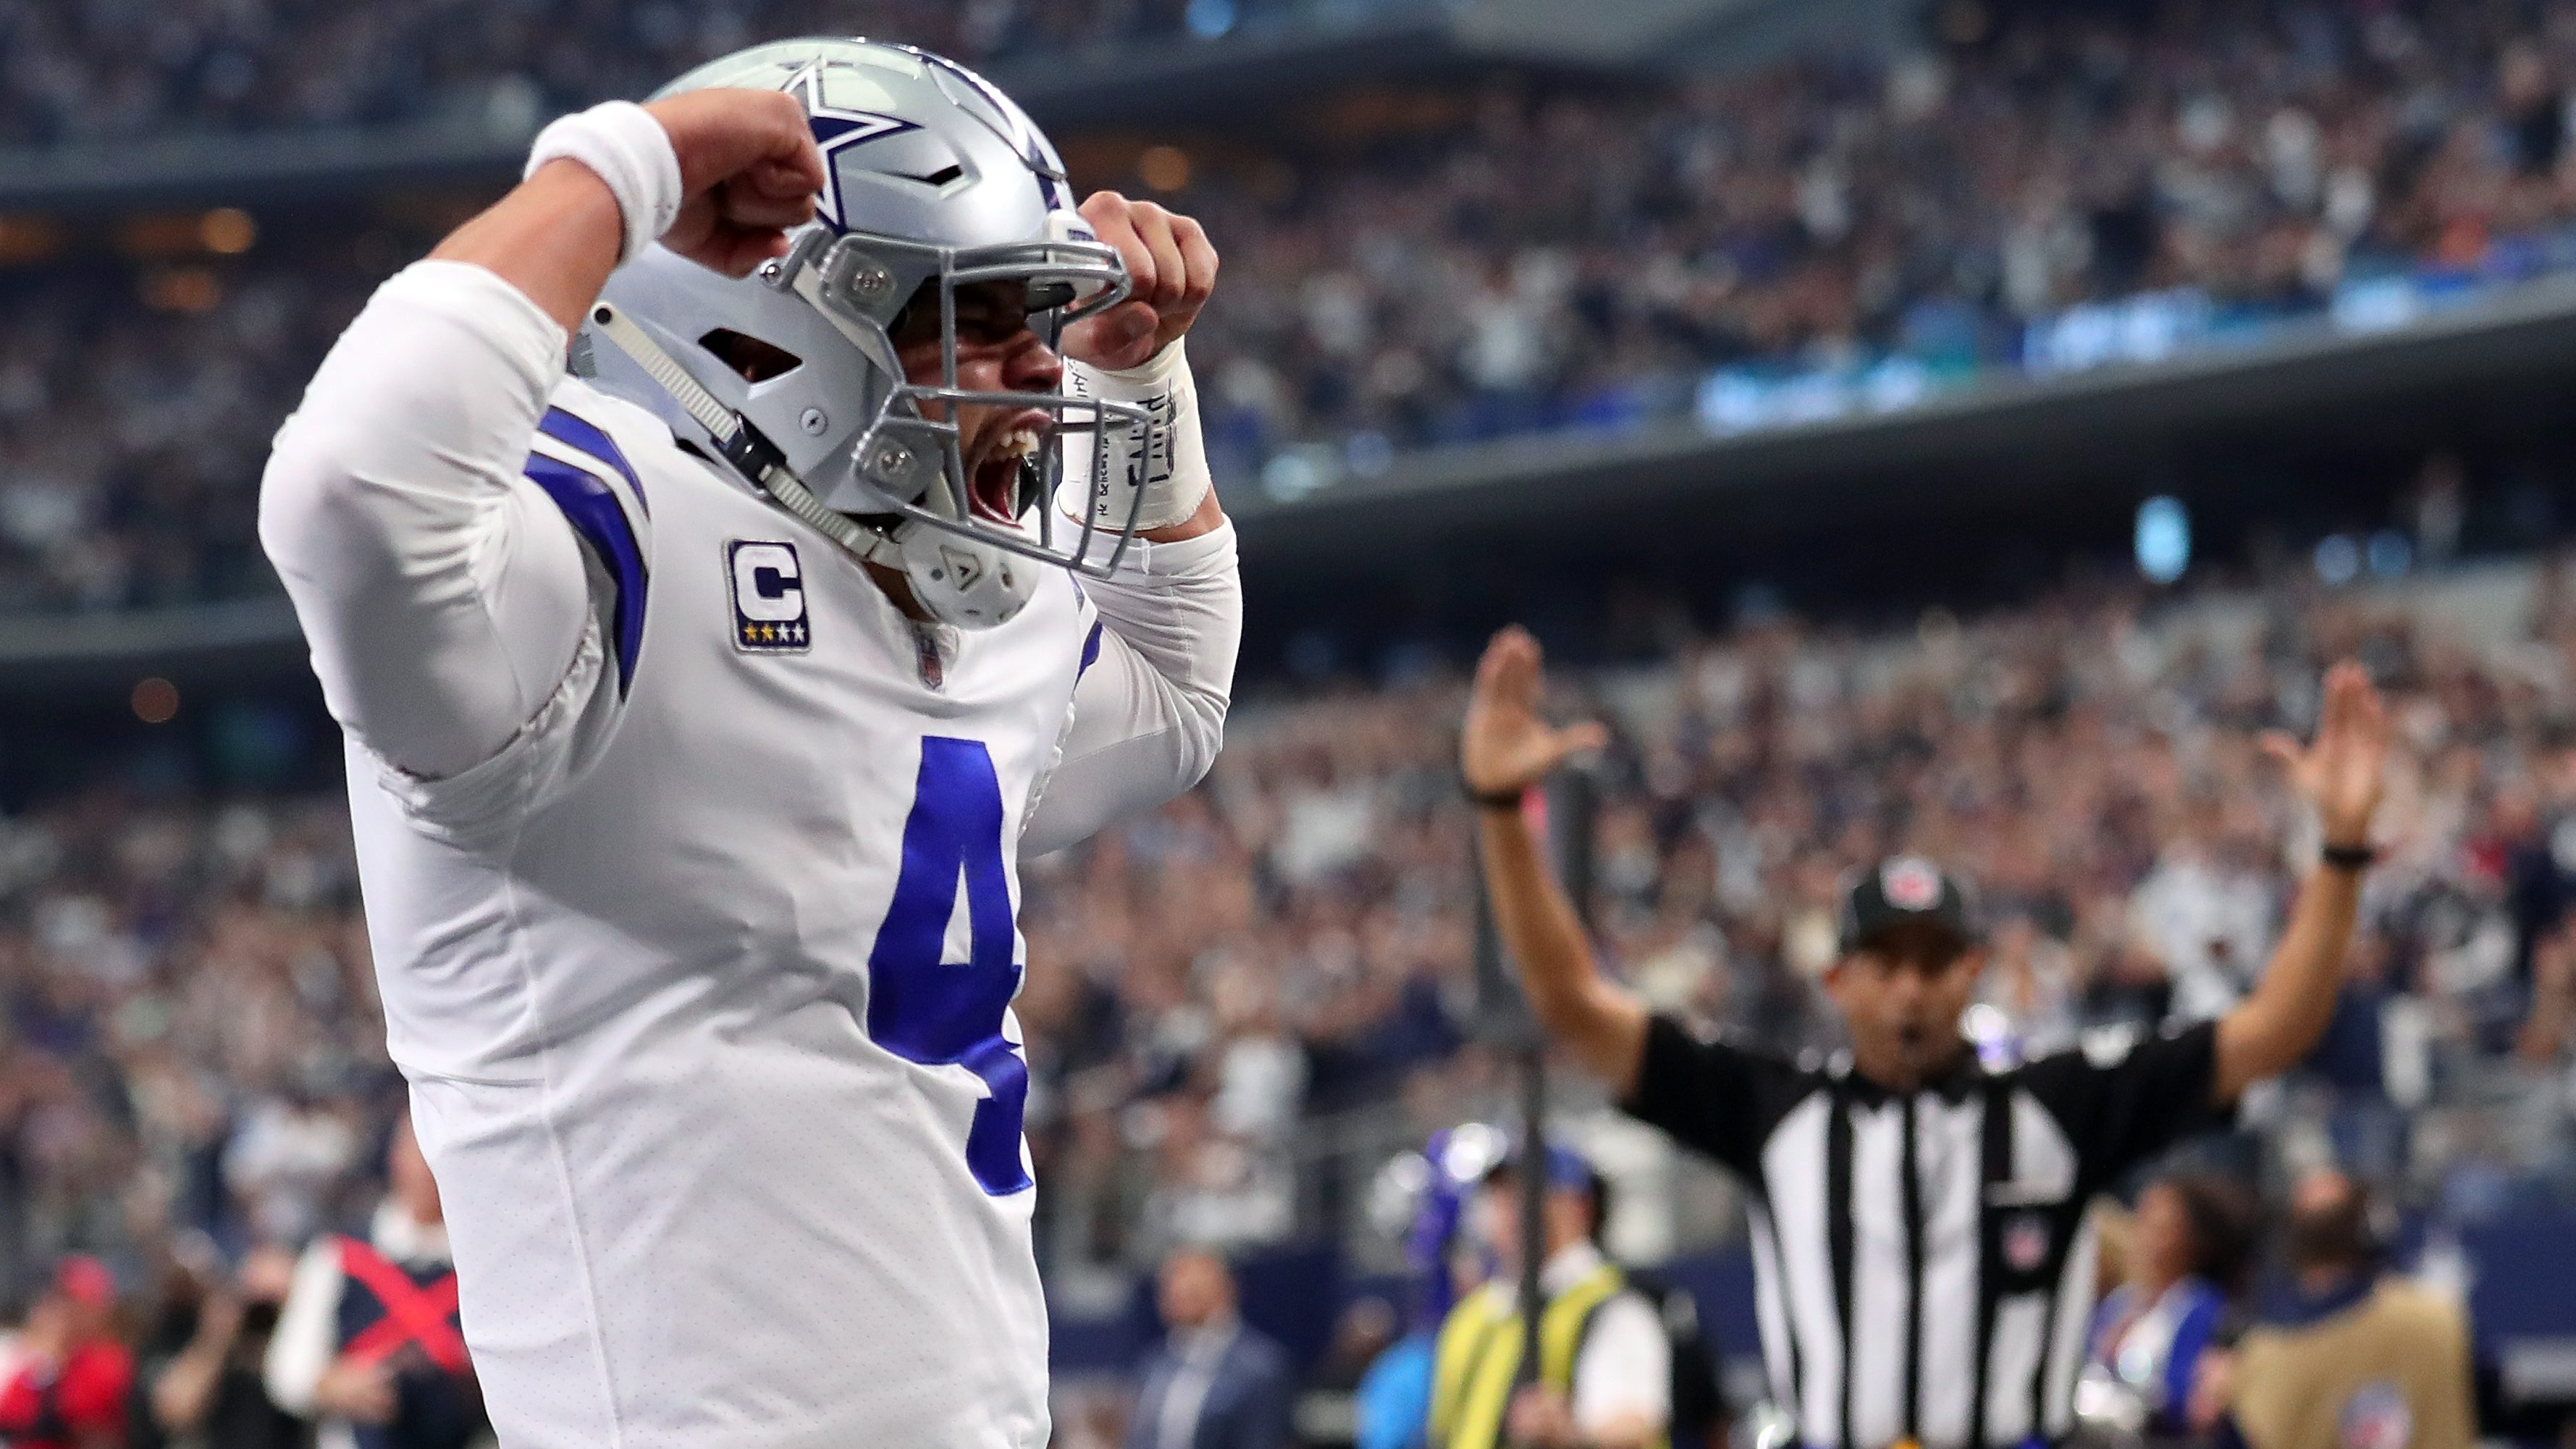 How to Watch Dallas Cowboys Games Without Cable - Fire Stick Tricks